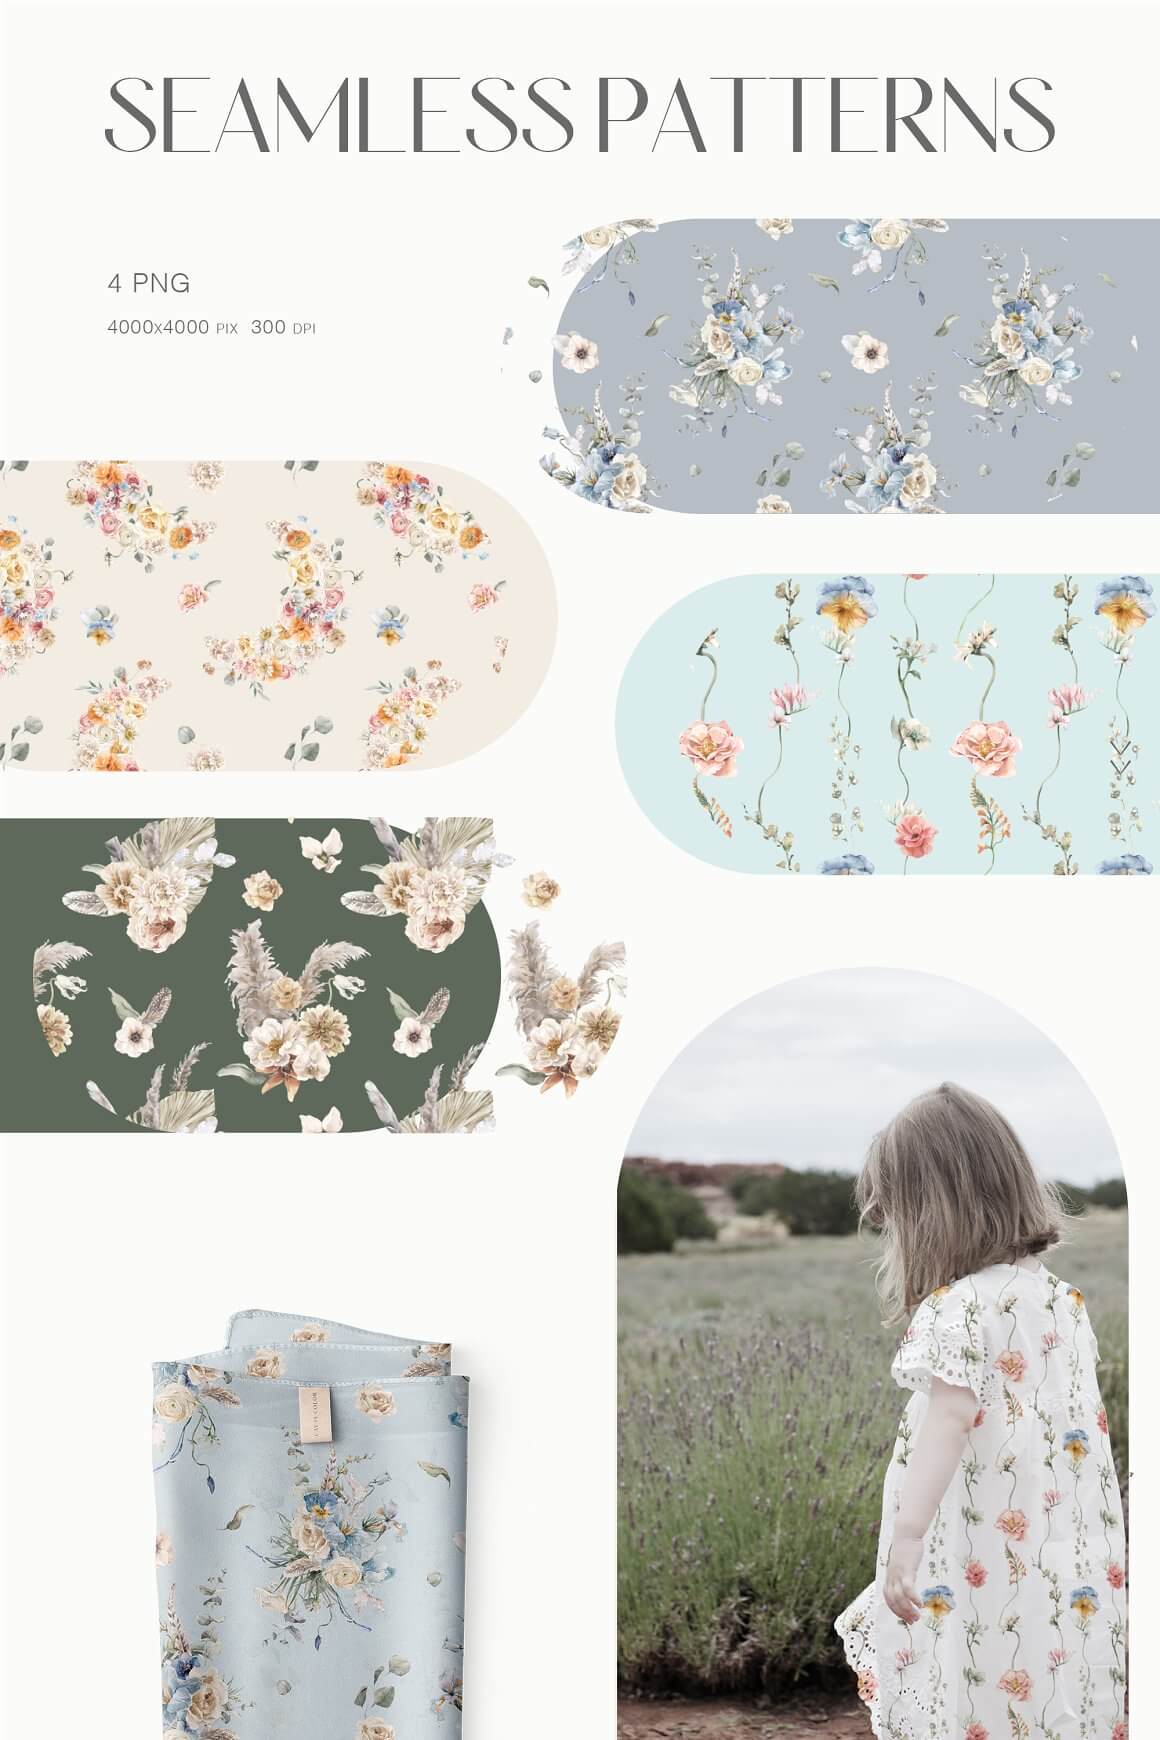 Seamless patterns with flower design on the pastel fabric.